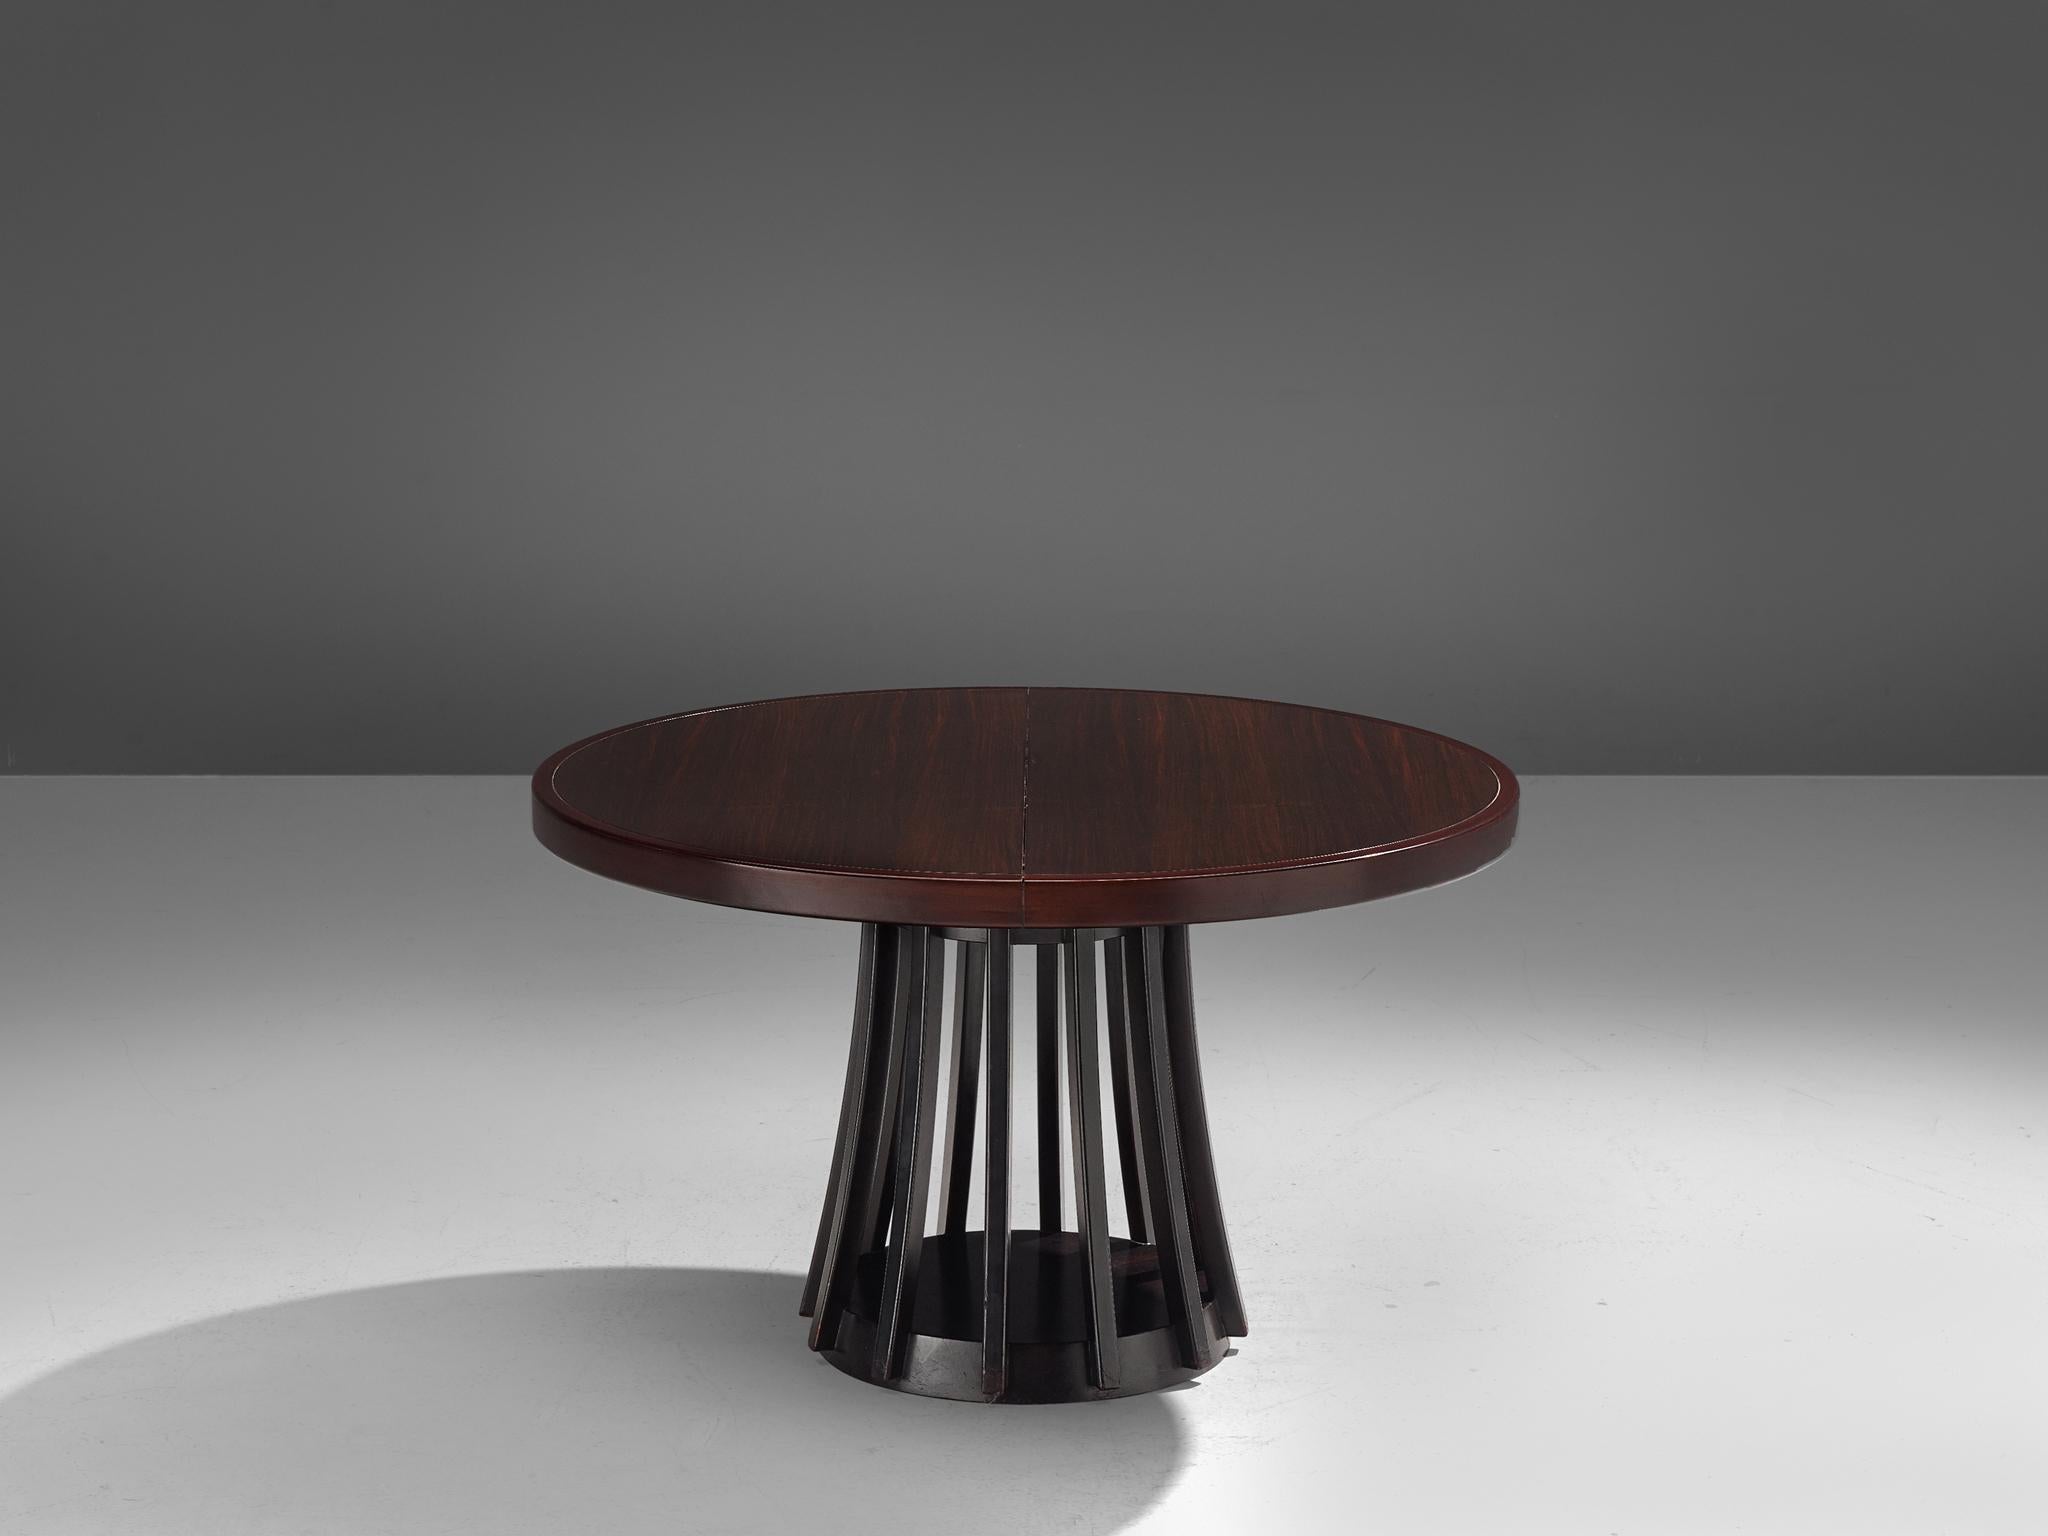 Angelo Mangiarotti for La Sorgente dei Mobili, dining table, mahogany, Italy, 1972.

An extendable mahogany center or dining table by Angelo Mangiarotti, manufactured by La Sorgente Dei Mobili. The pedestal base consists of a round foot, connected